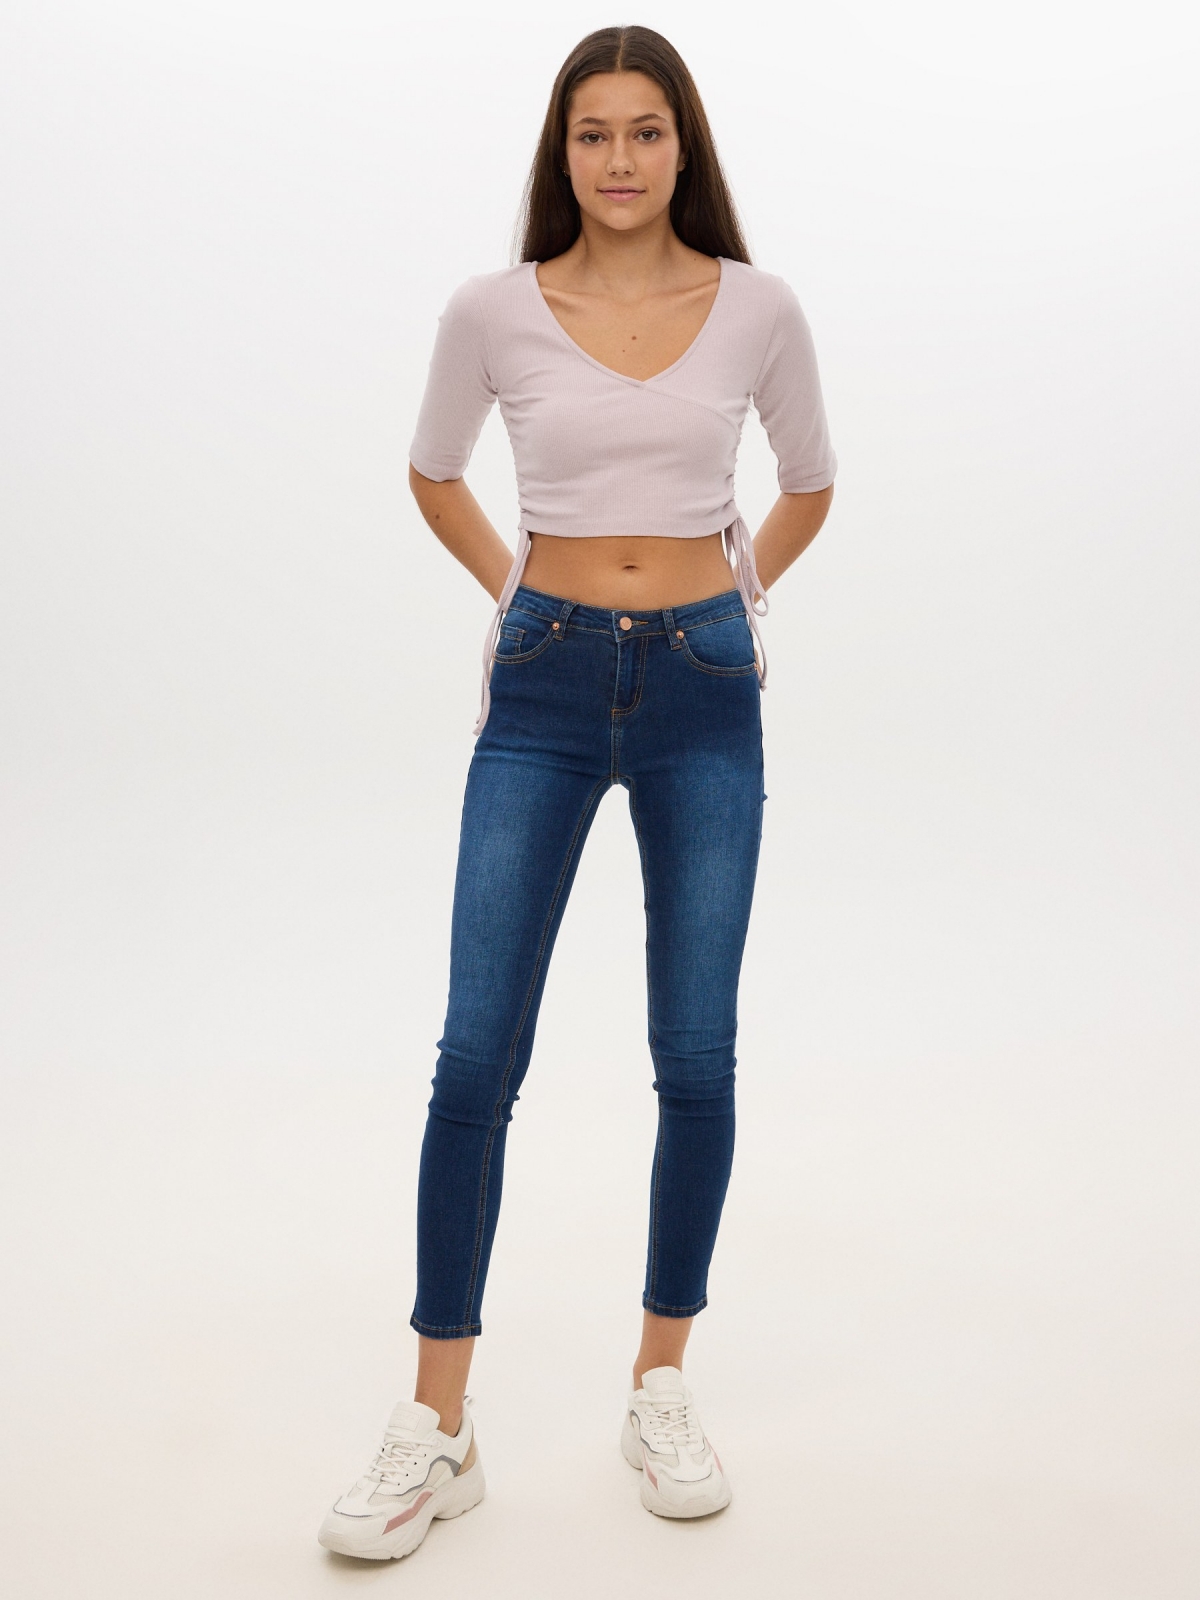 Jeans skinny mid rise azul vista geral frontal